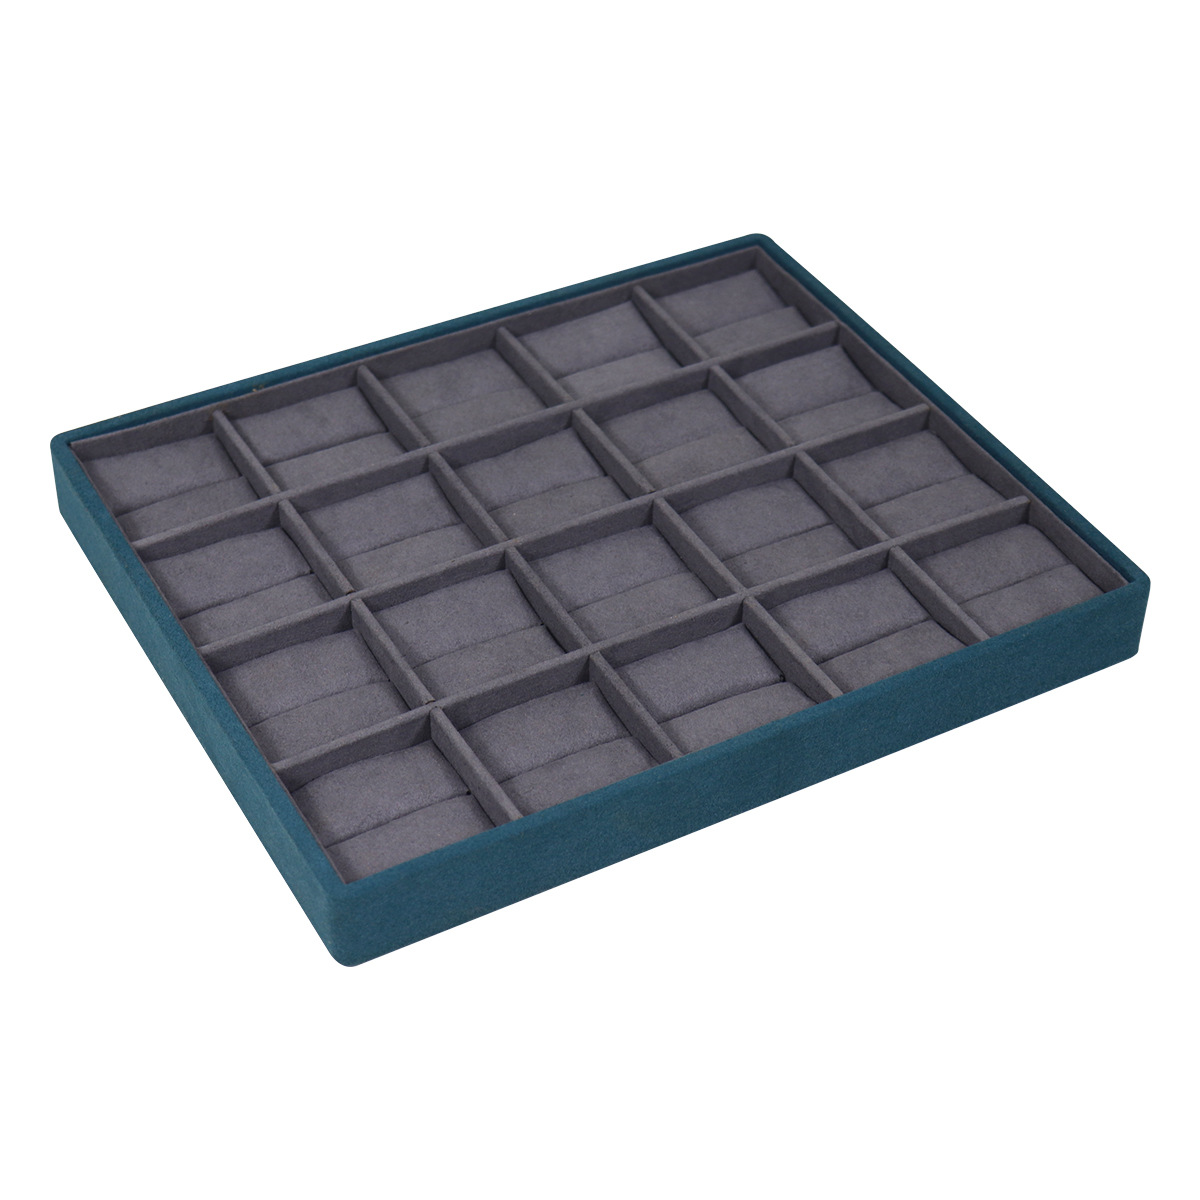 20:No. 11 Gray surface: 20-bit ring plate display plate